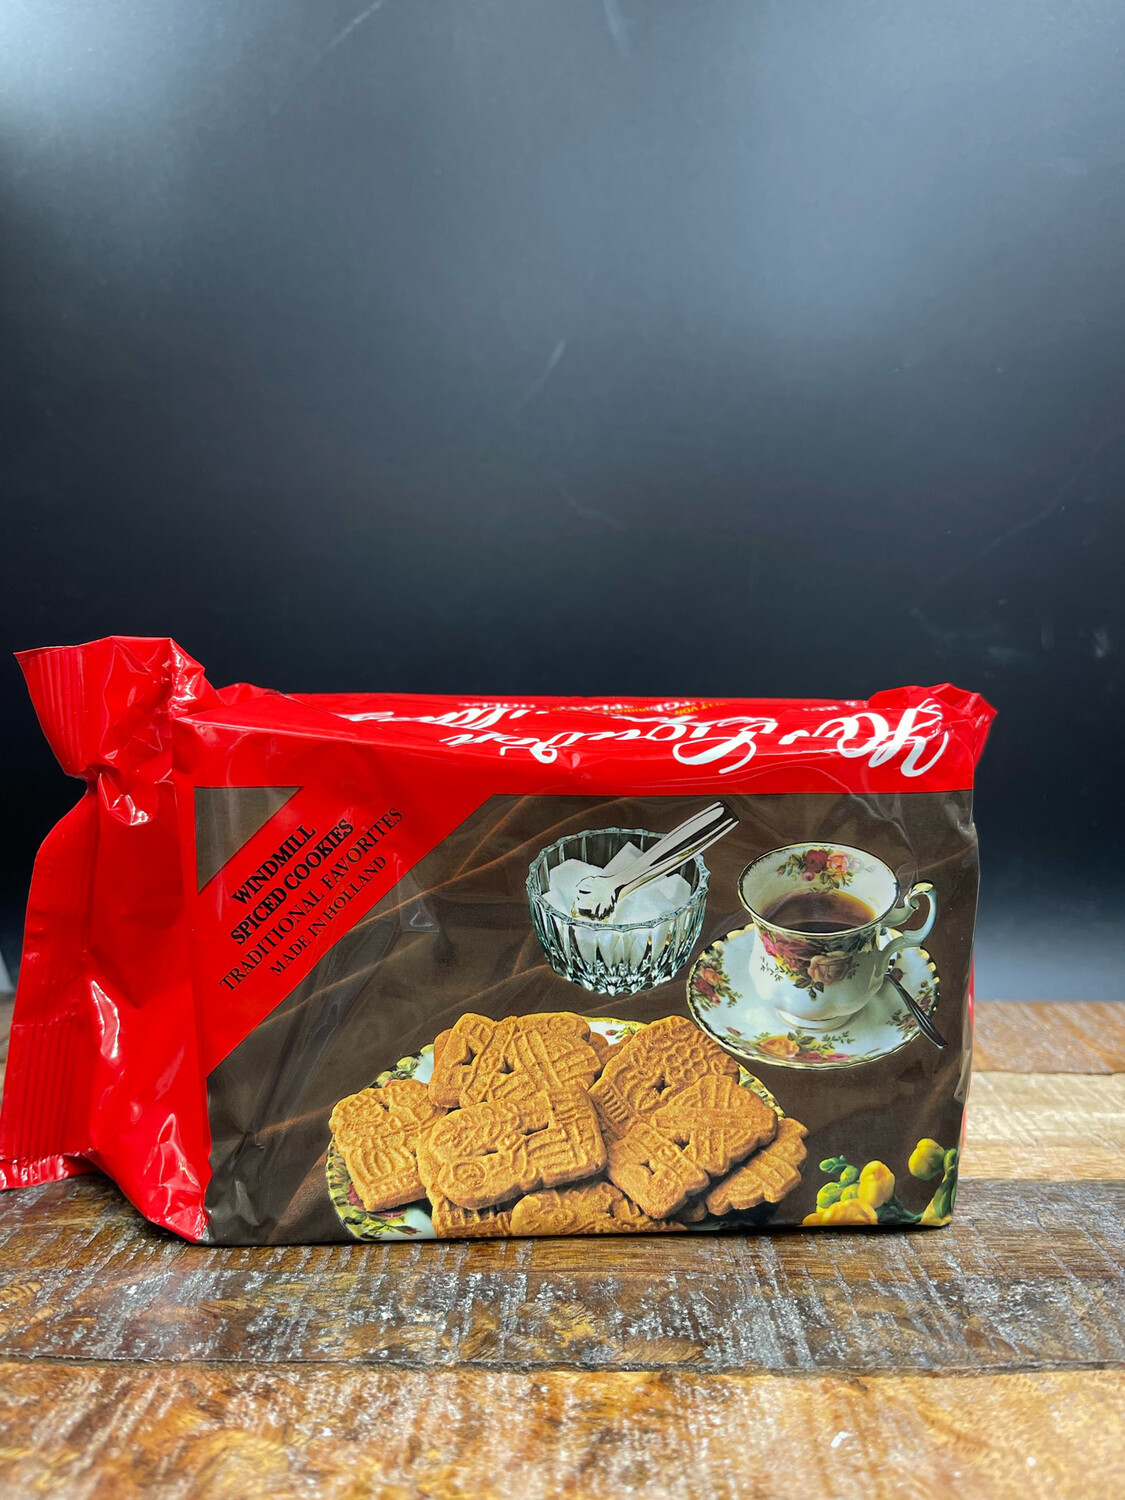 De Ruiter Speculaas 400g Ginger Biscuits